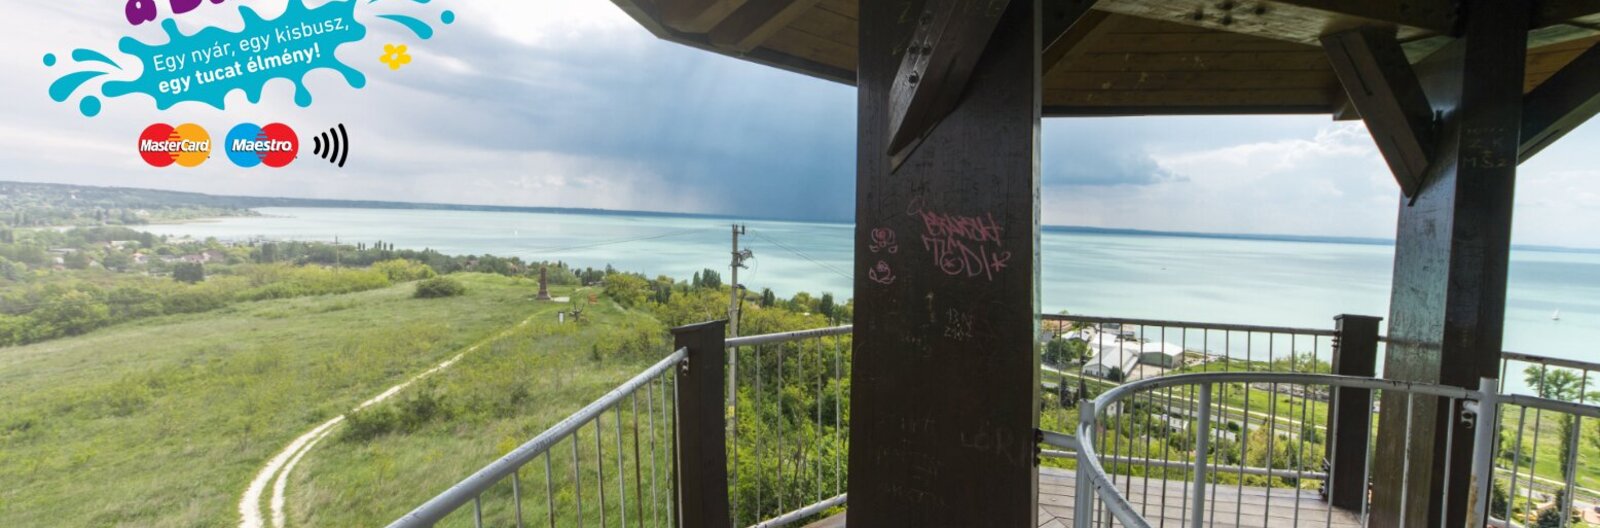 Balaton’s observation towers offer jaw-dropping vistas